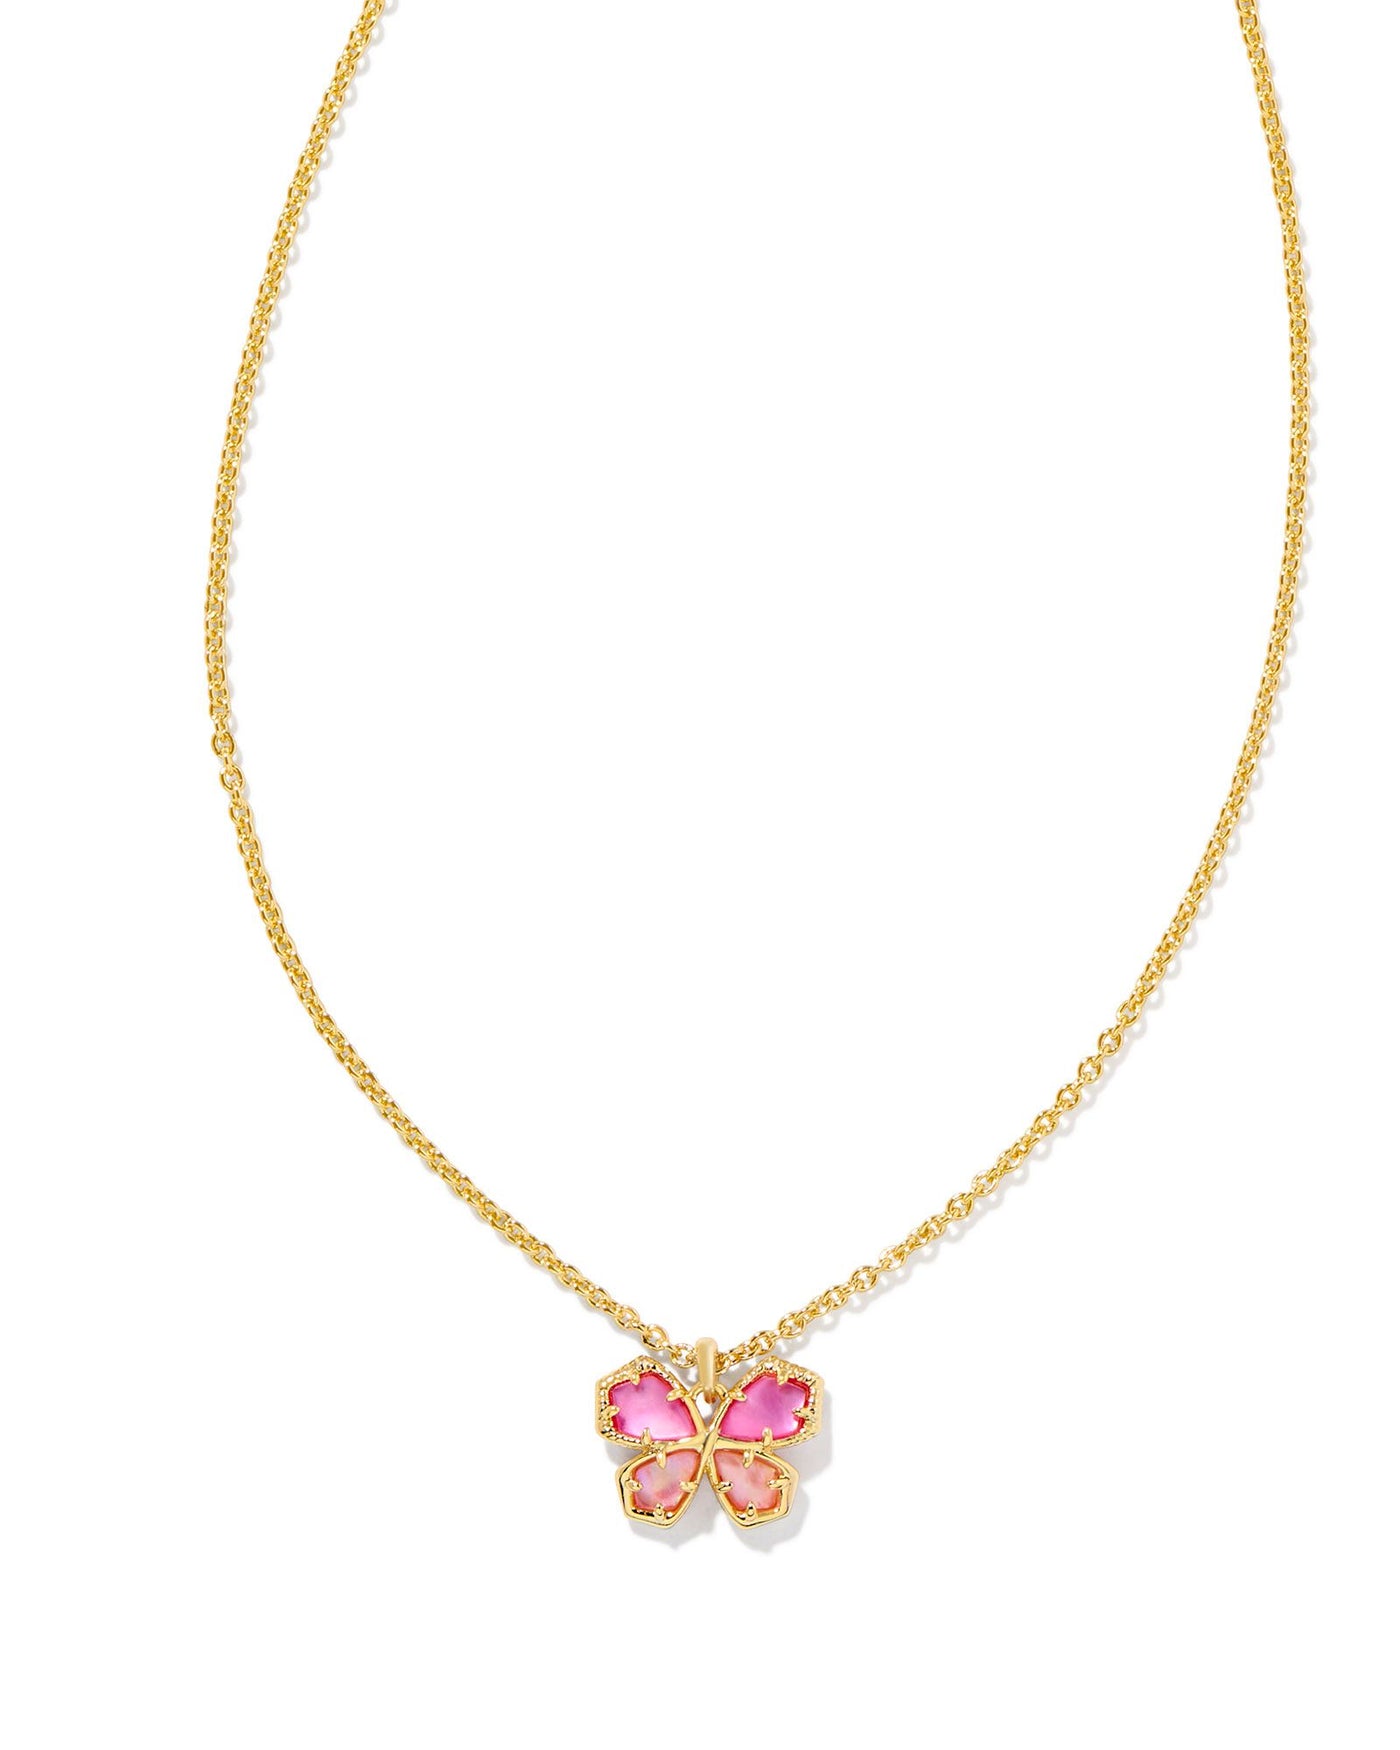 Kendra Scott Mae Butterfly Pendant-Necklaces-Kendra Scott-Market Street Nest, Fashionable Clothing, Shoes and Home Décor Located in Mabank, TX